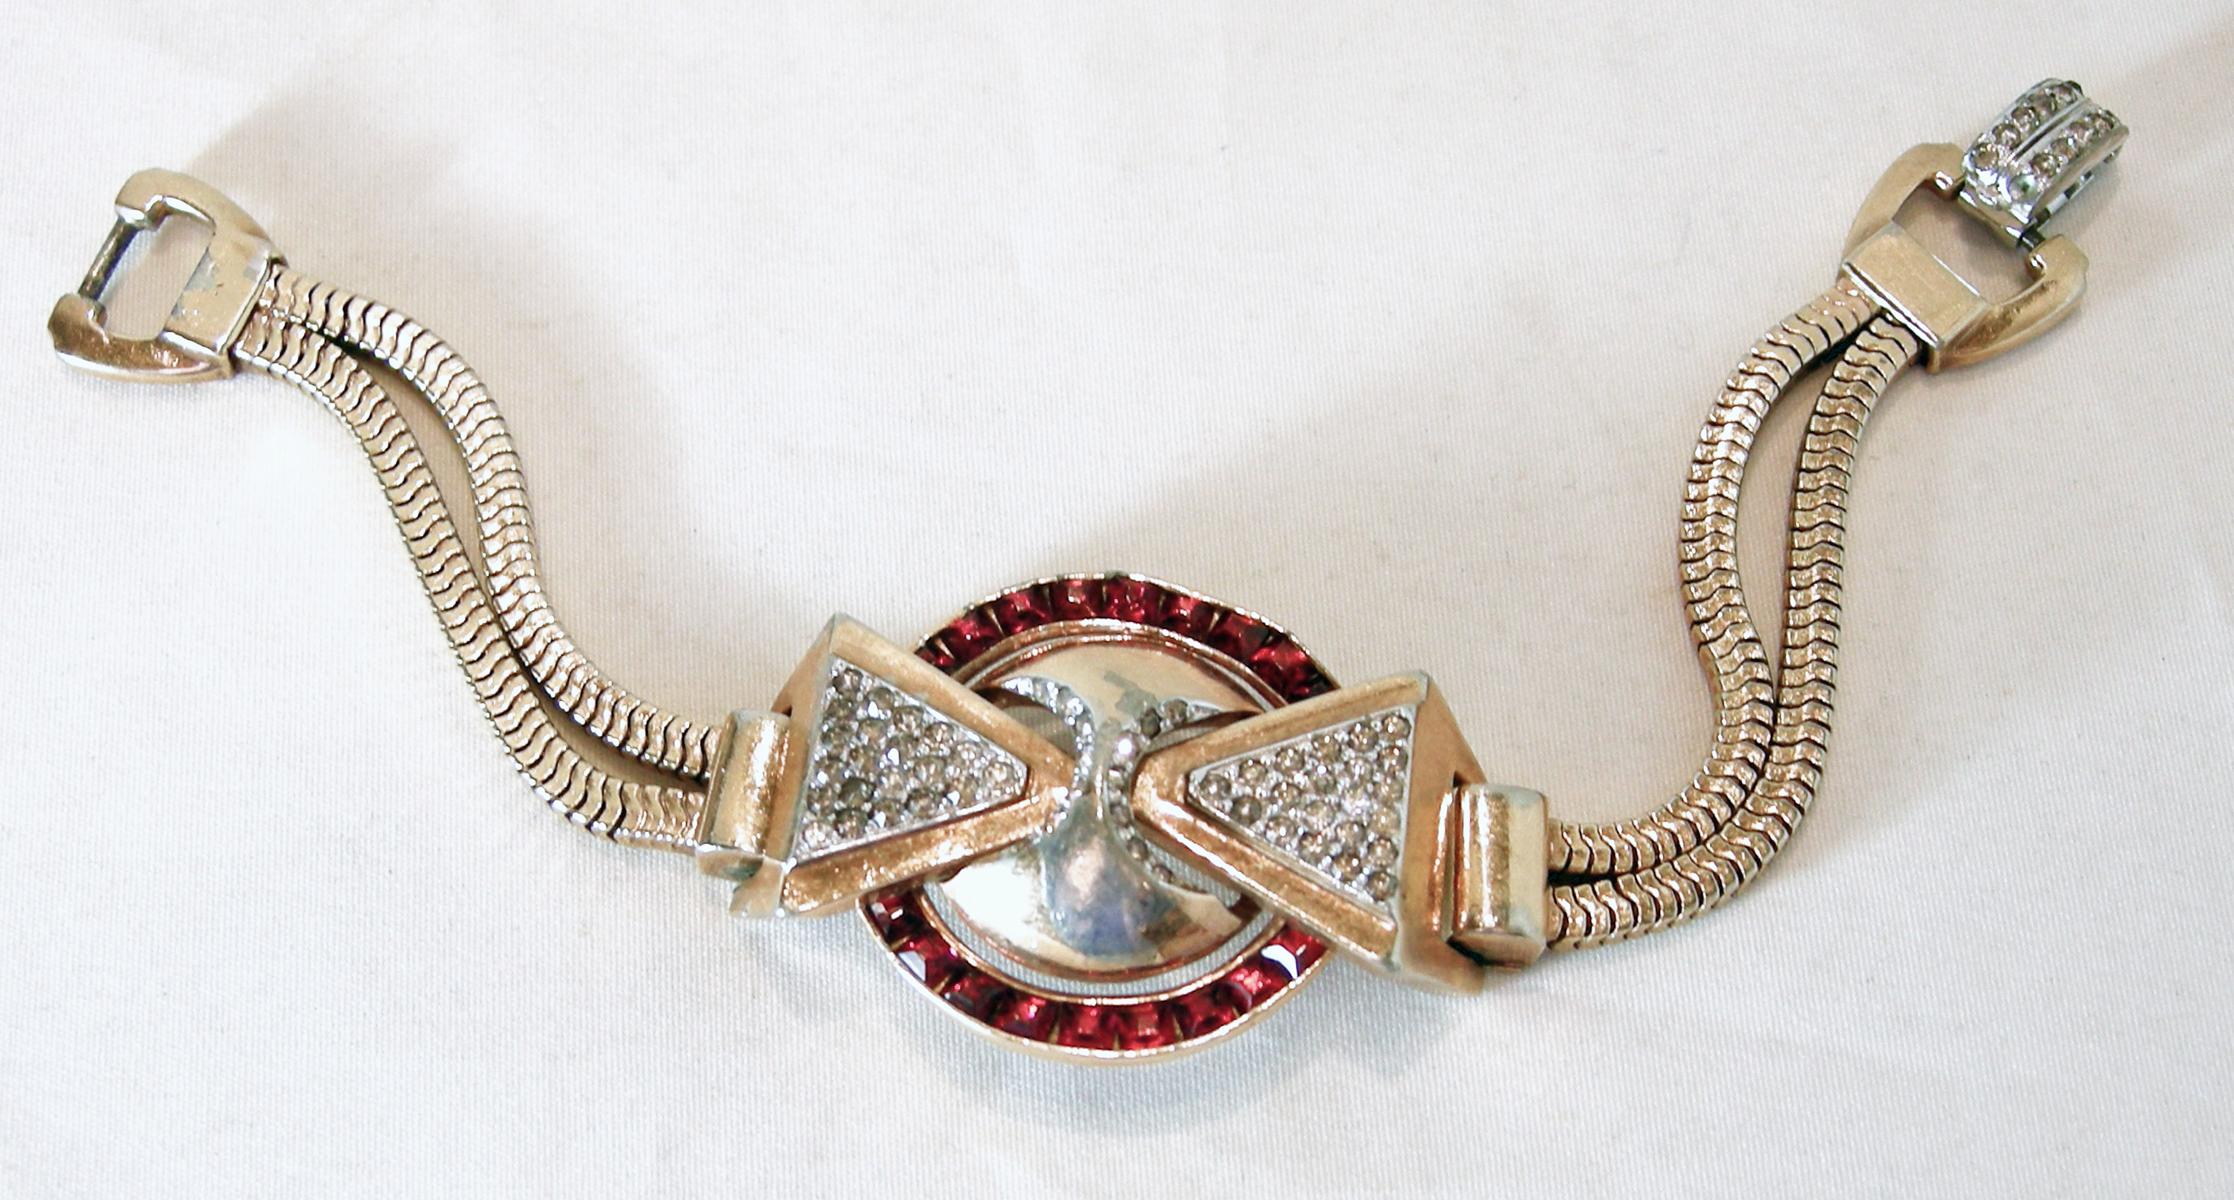 This vintage bracelet by Mazer screams Art Deco.  The center has faux rubies that are channel set in the middle circle design. On each side there is a crystal encrusted triangle pointing inward to a gold tone ball center.  The double chain leads to